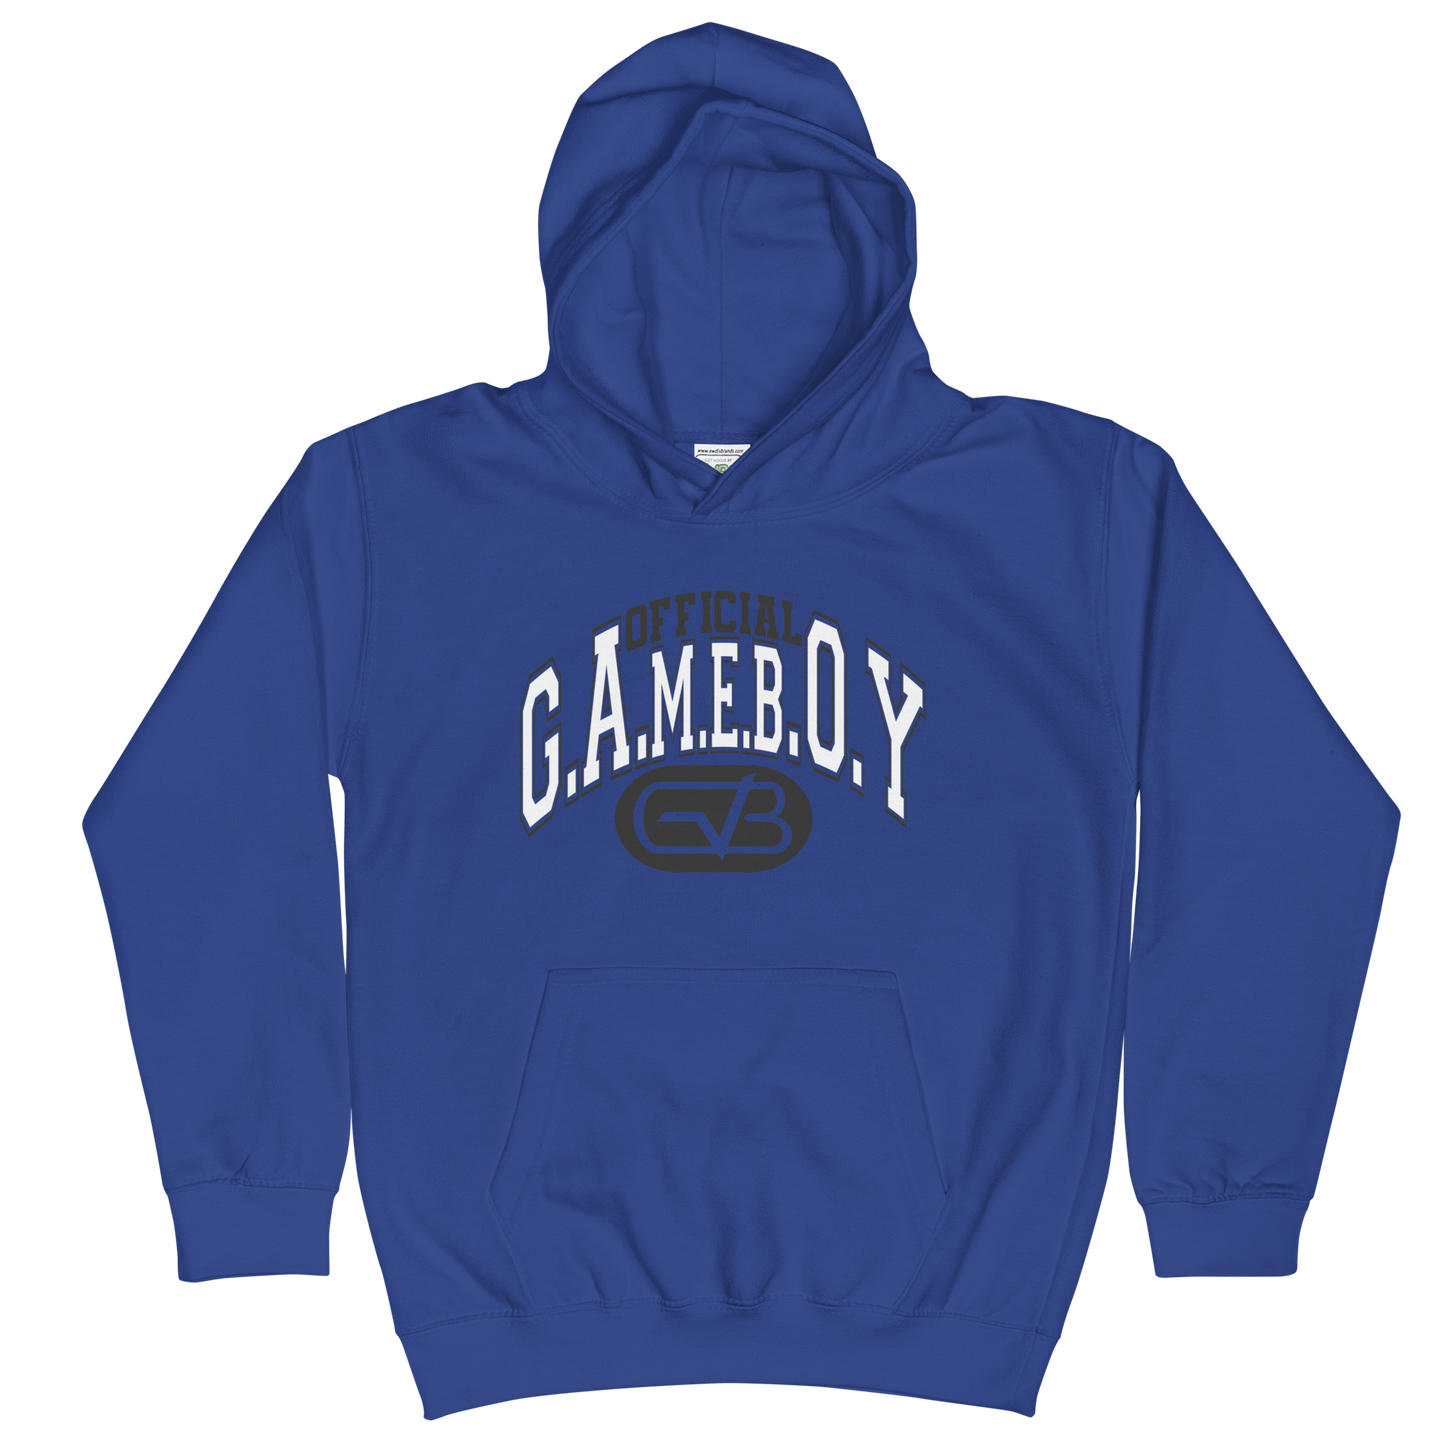 Official G.A.M.E.B.O.Y 2023 Kids Youth Hoody